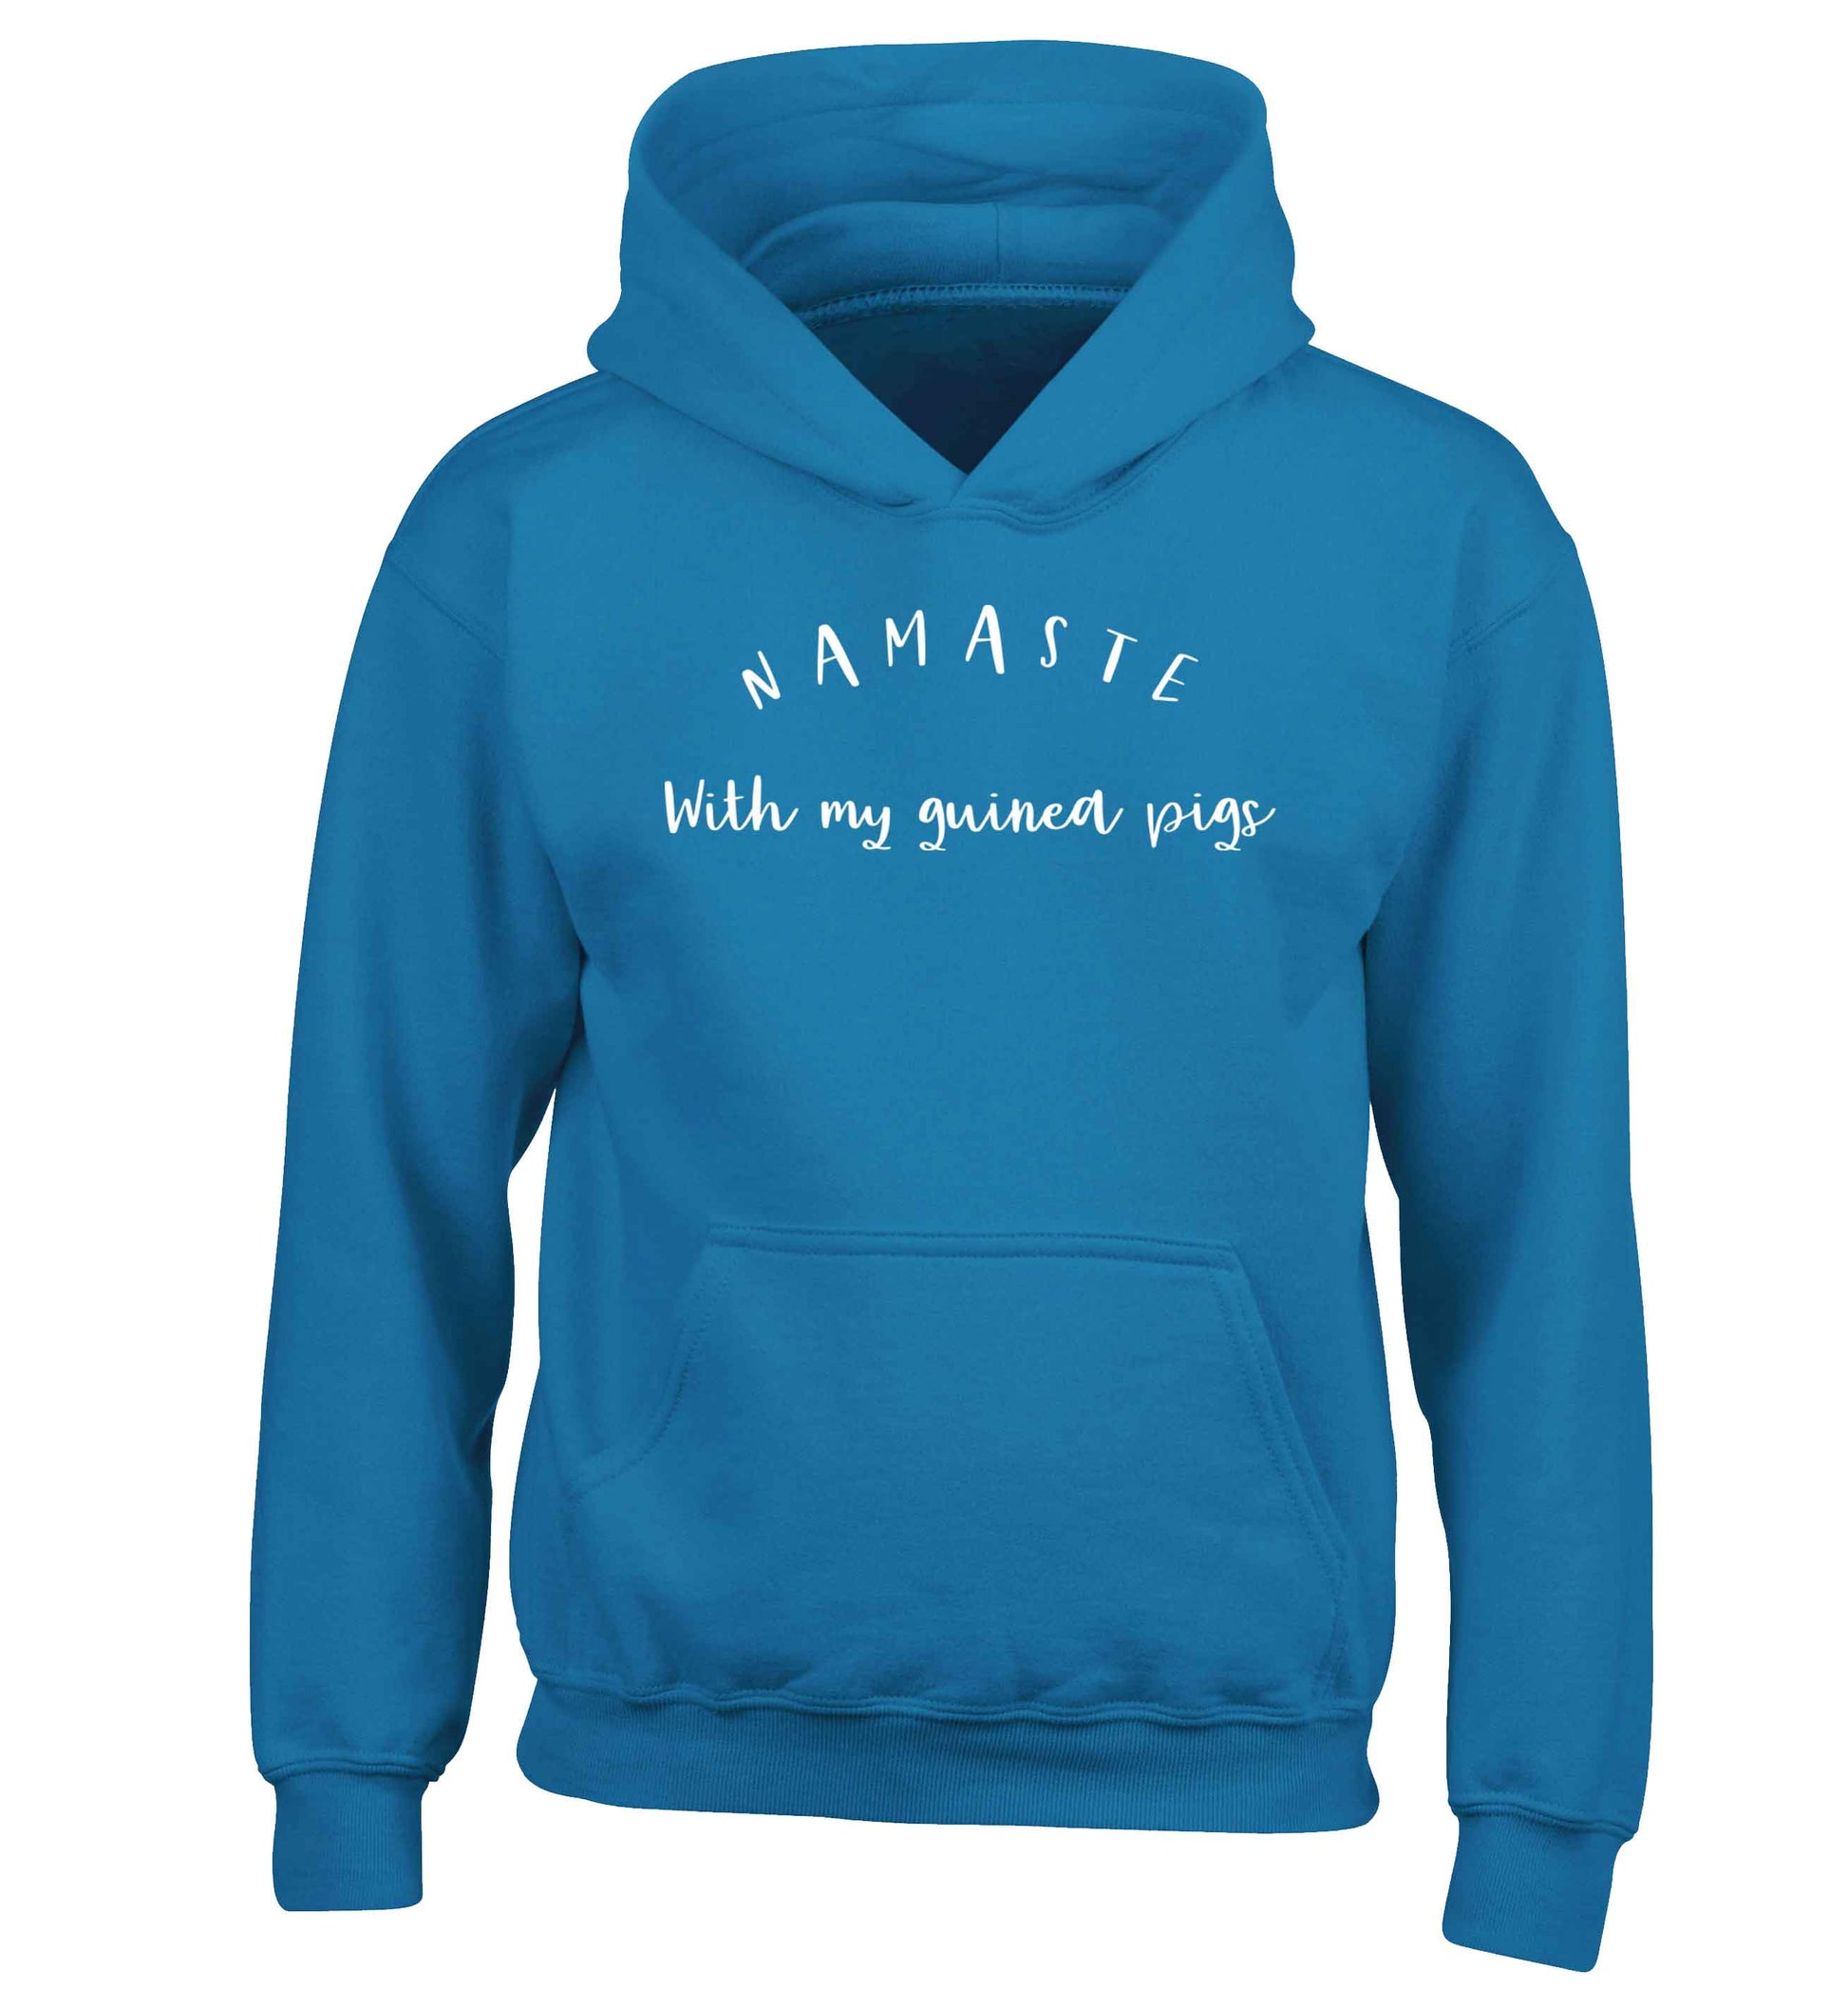 Namaste with my guinea pigs children's blue hoodie 12-13 Years